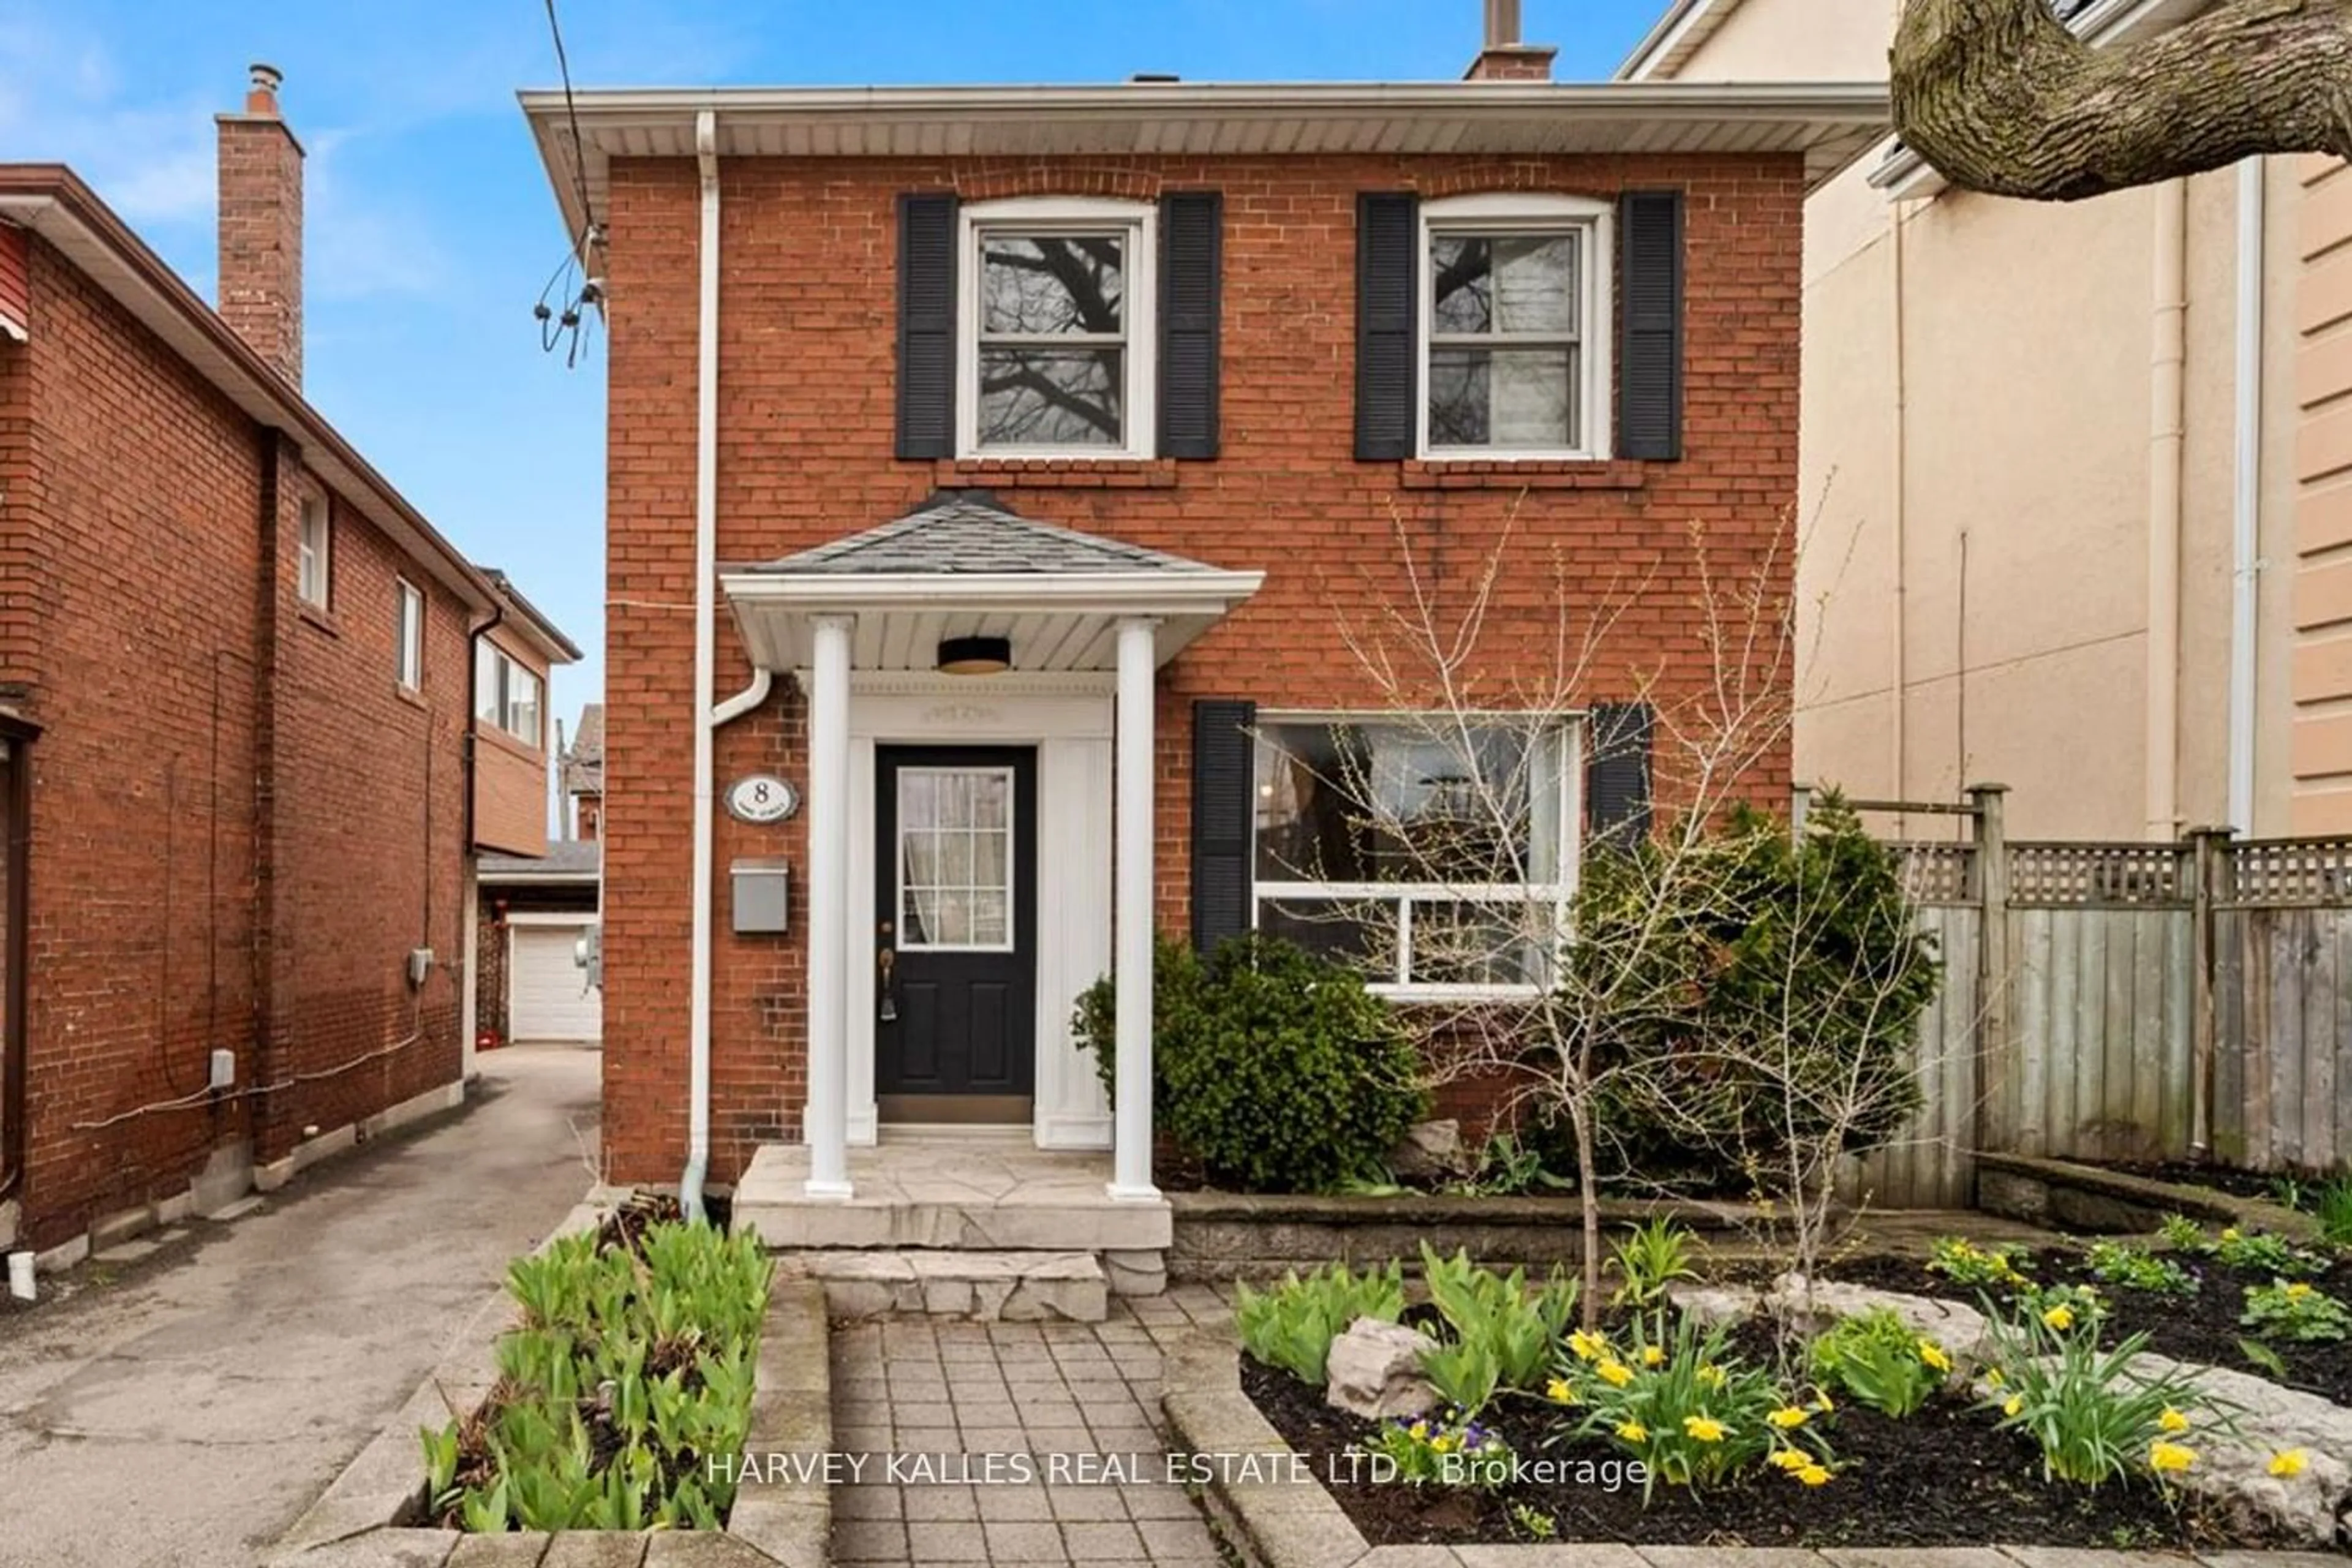 Home with brick exterior material for 8 Ford St, Toronto Ontario M6N 3A1